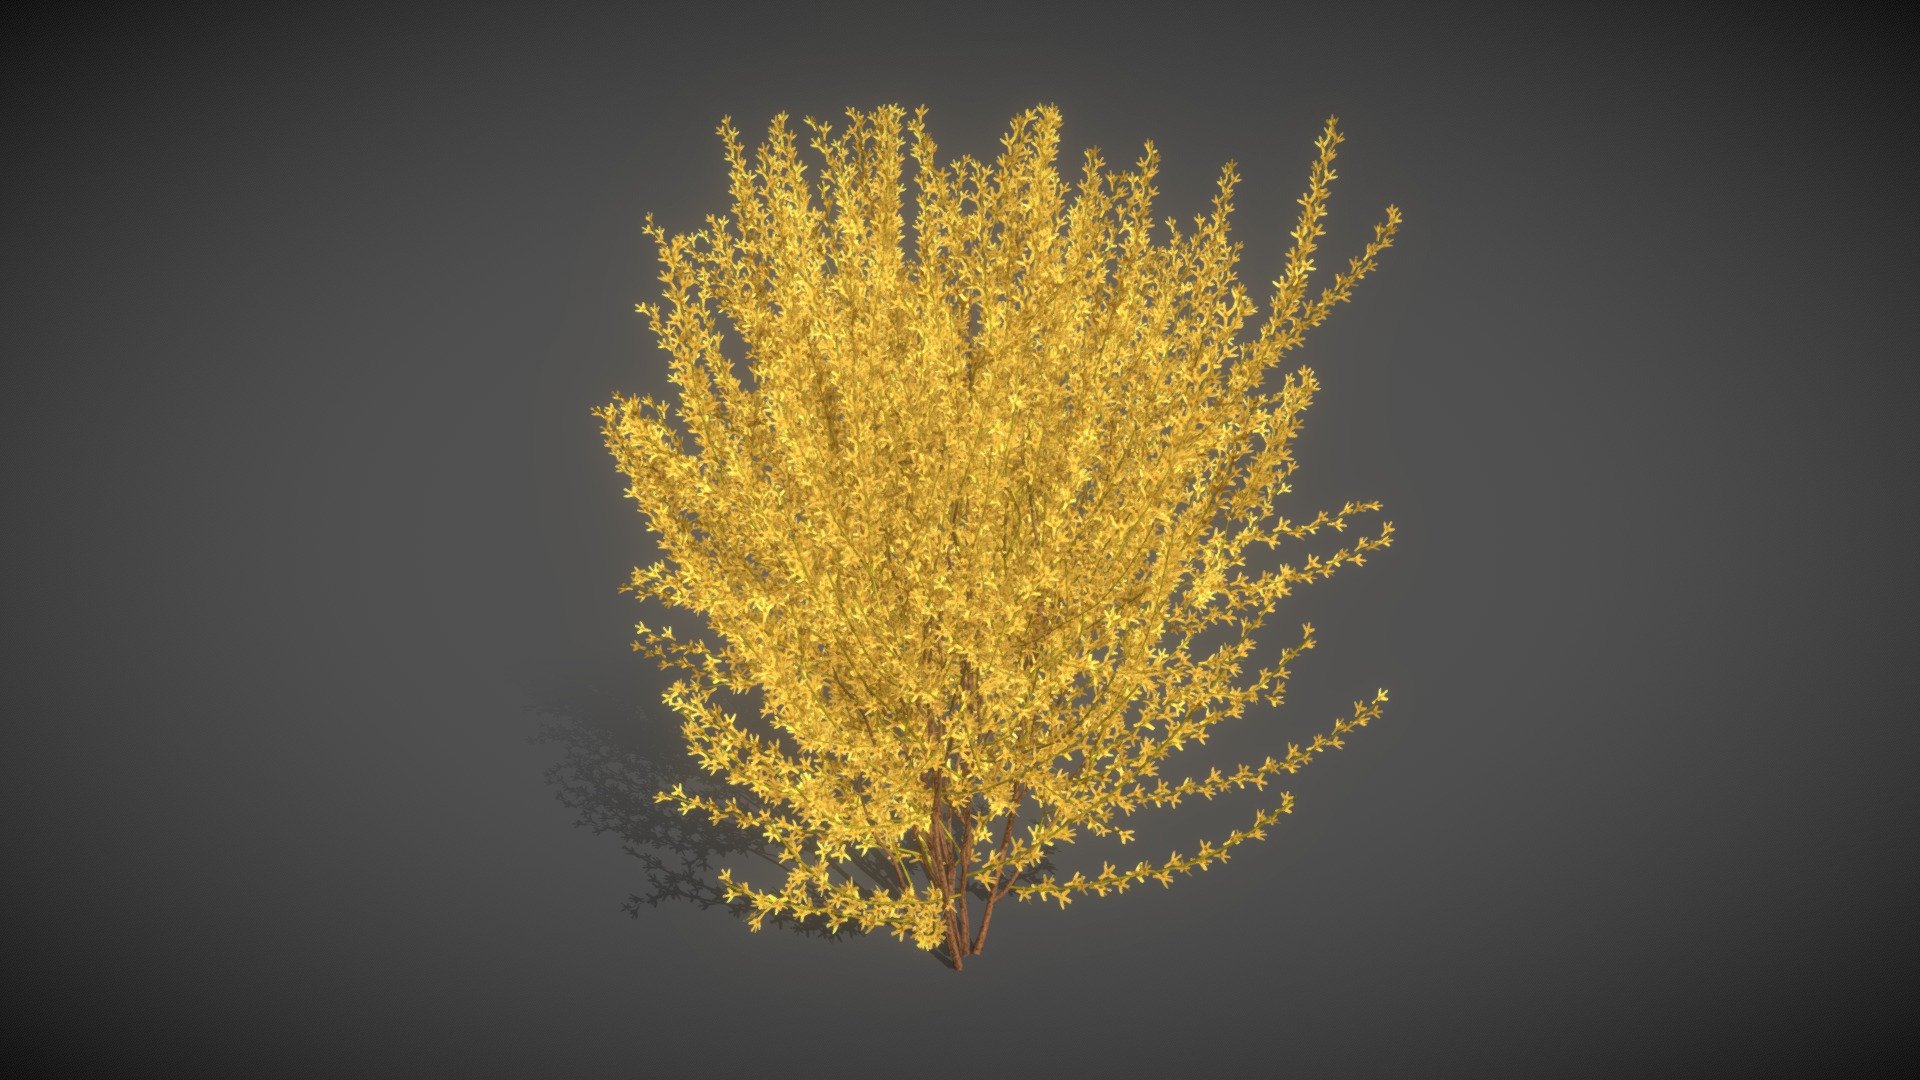 This XfrogPlants Forsythia 3D model features one free, highly detailed, fully textured variation of the plant.

Shrub, broadleaf deciduous, broad spreading Height: up to 4 m. Origin: China Environment: in full sun; on any type of fresh soil Climate: warm, temperate; it endures frosty winters

Notes: Forsythia became known to the western world in the XVIII century. It was named in honor of William Forysth, director of the Chelsea Physic Garden. It has soon become a very popular gardening species because of it’s spectacular yellow flowering, which is one of the earliest and announces the arrival of Spring. It can and should be pruned often to encourage a bushy habit and to increase the production of flowers 3d model